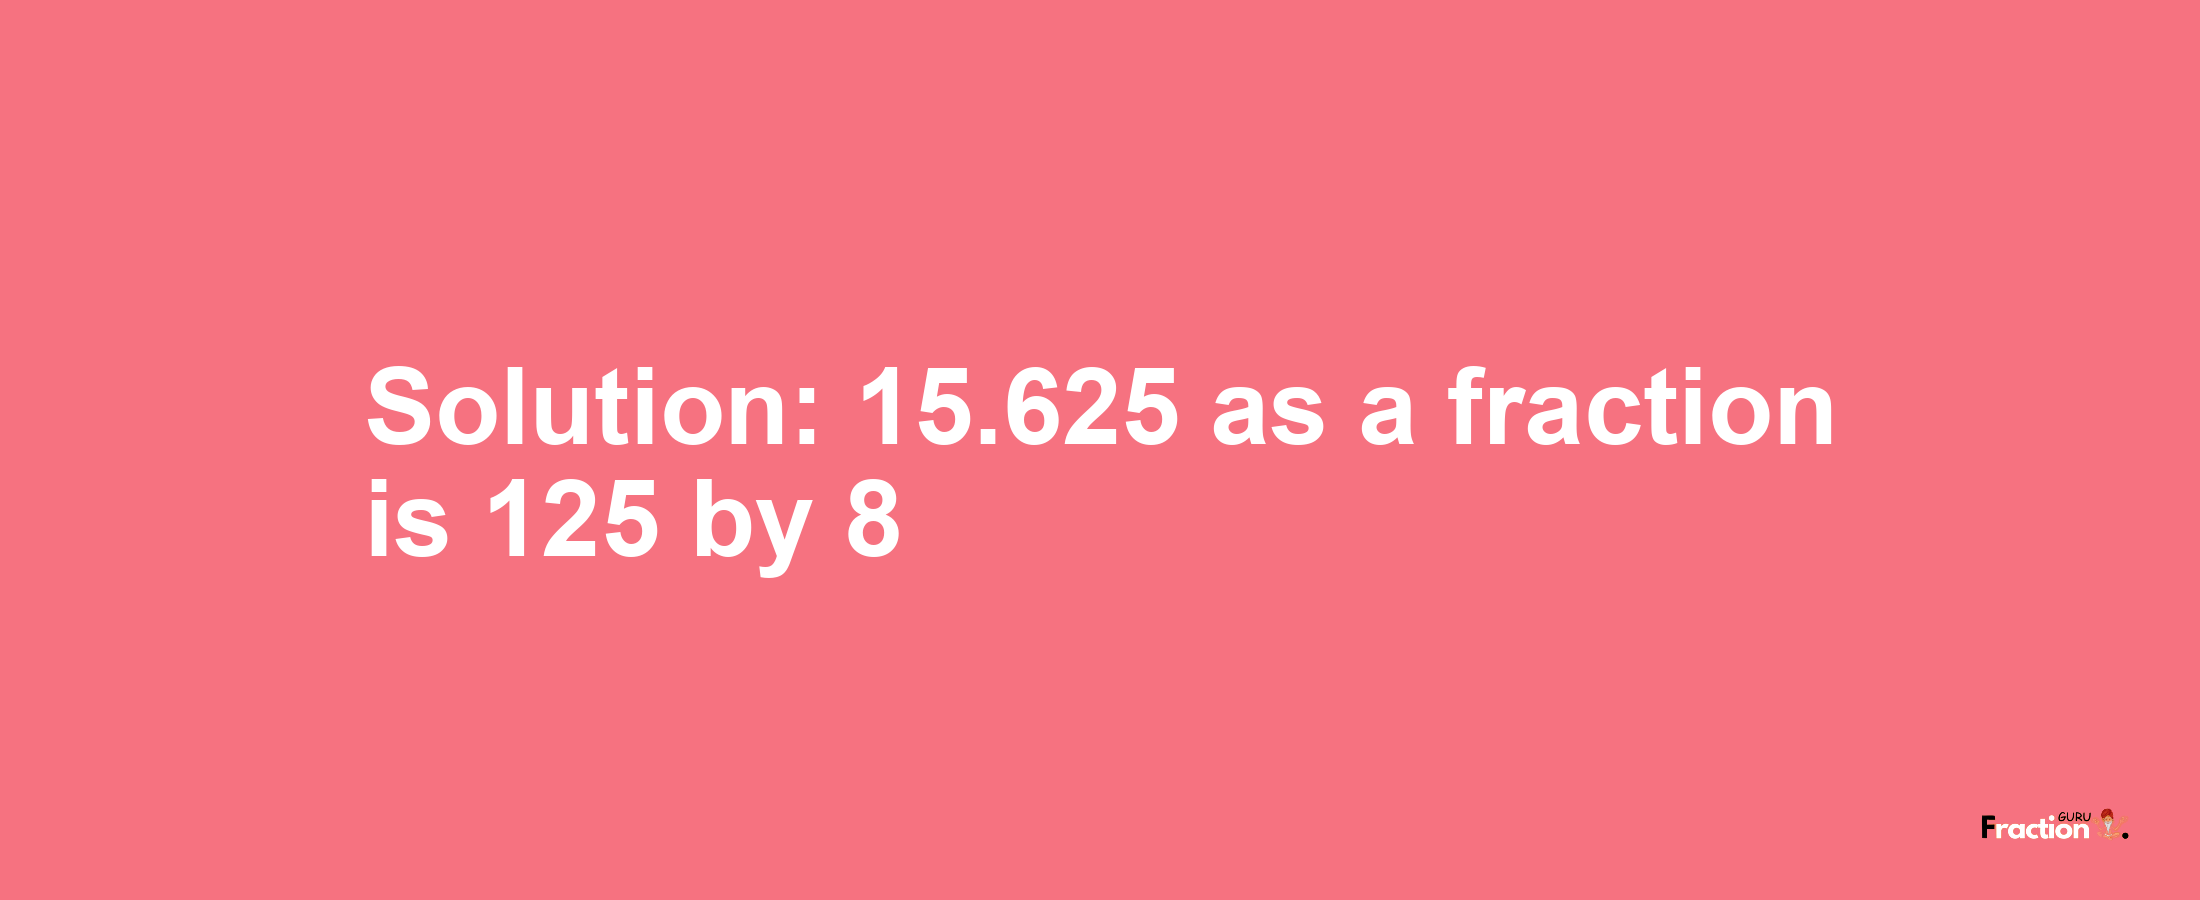 Solution:15.625 as a fraction is 125/8